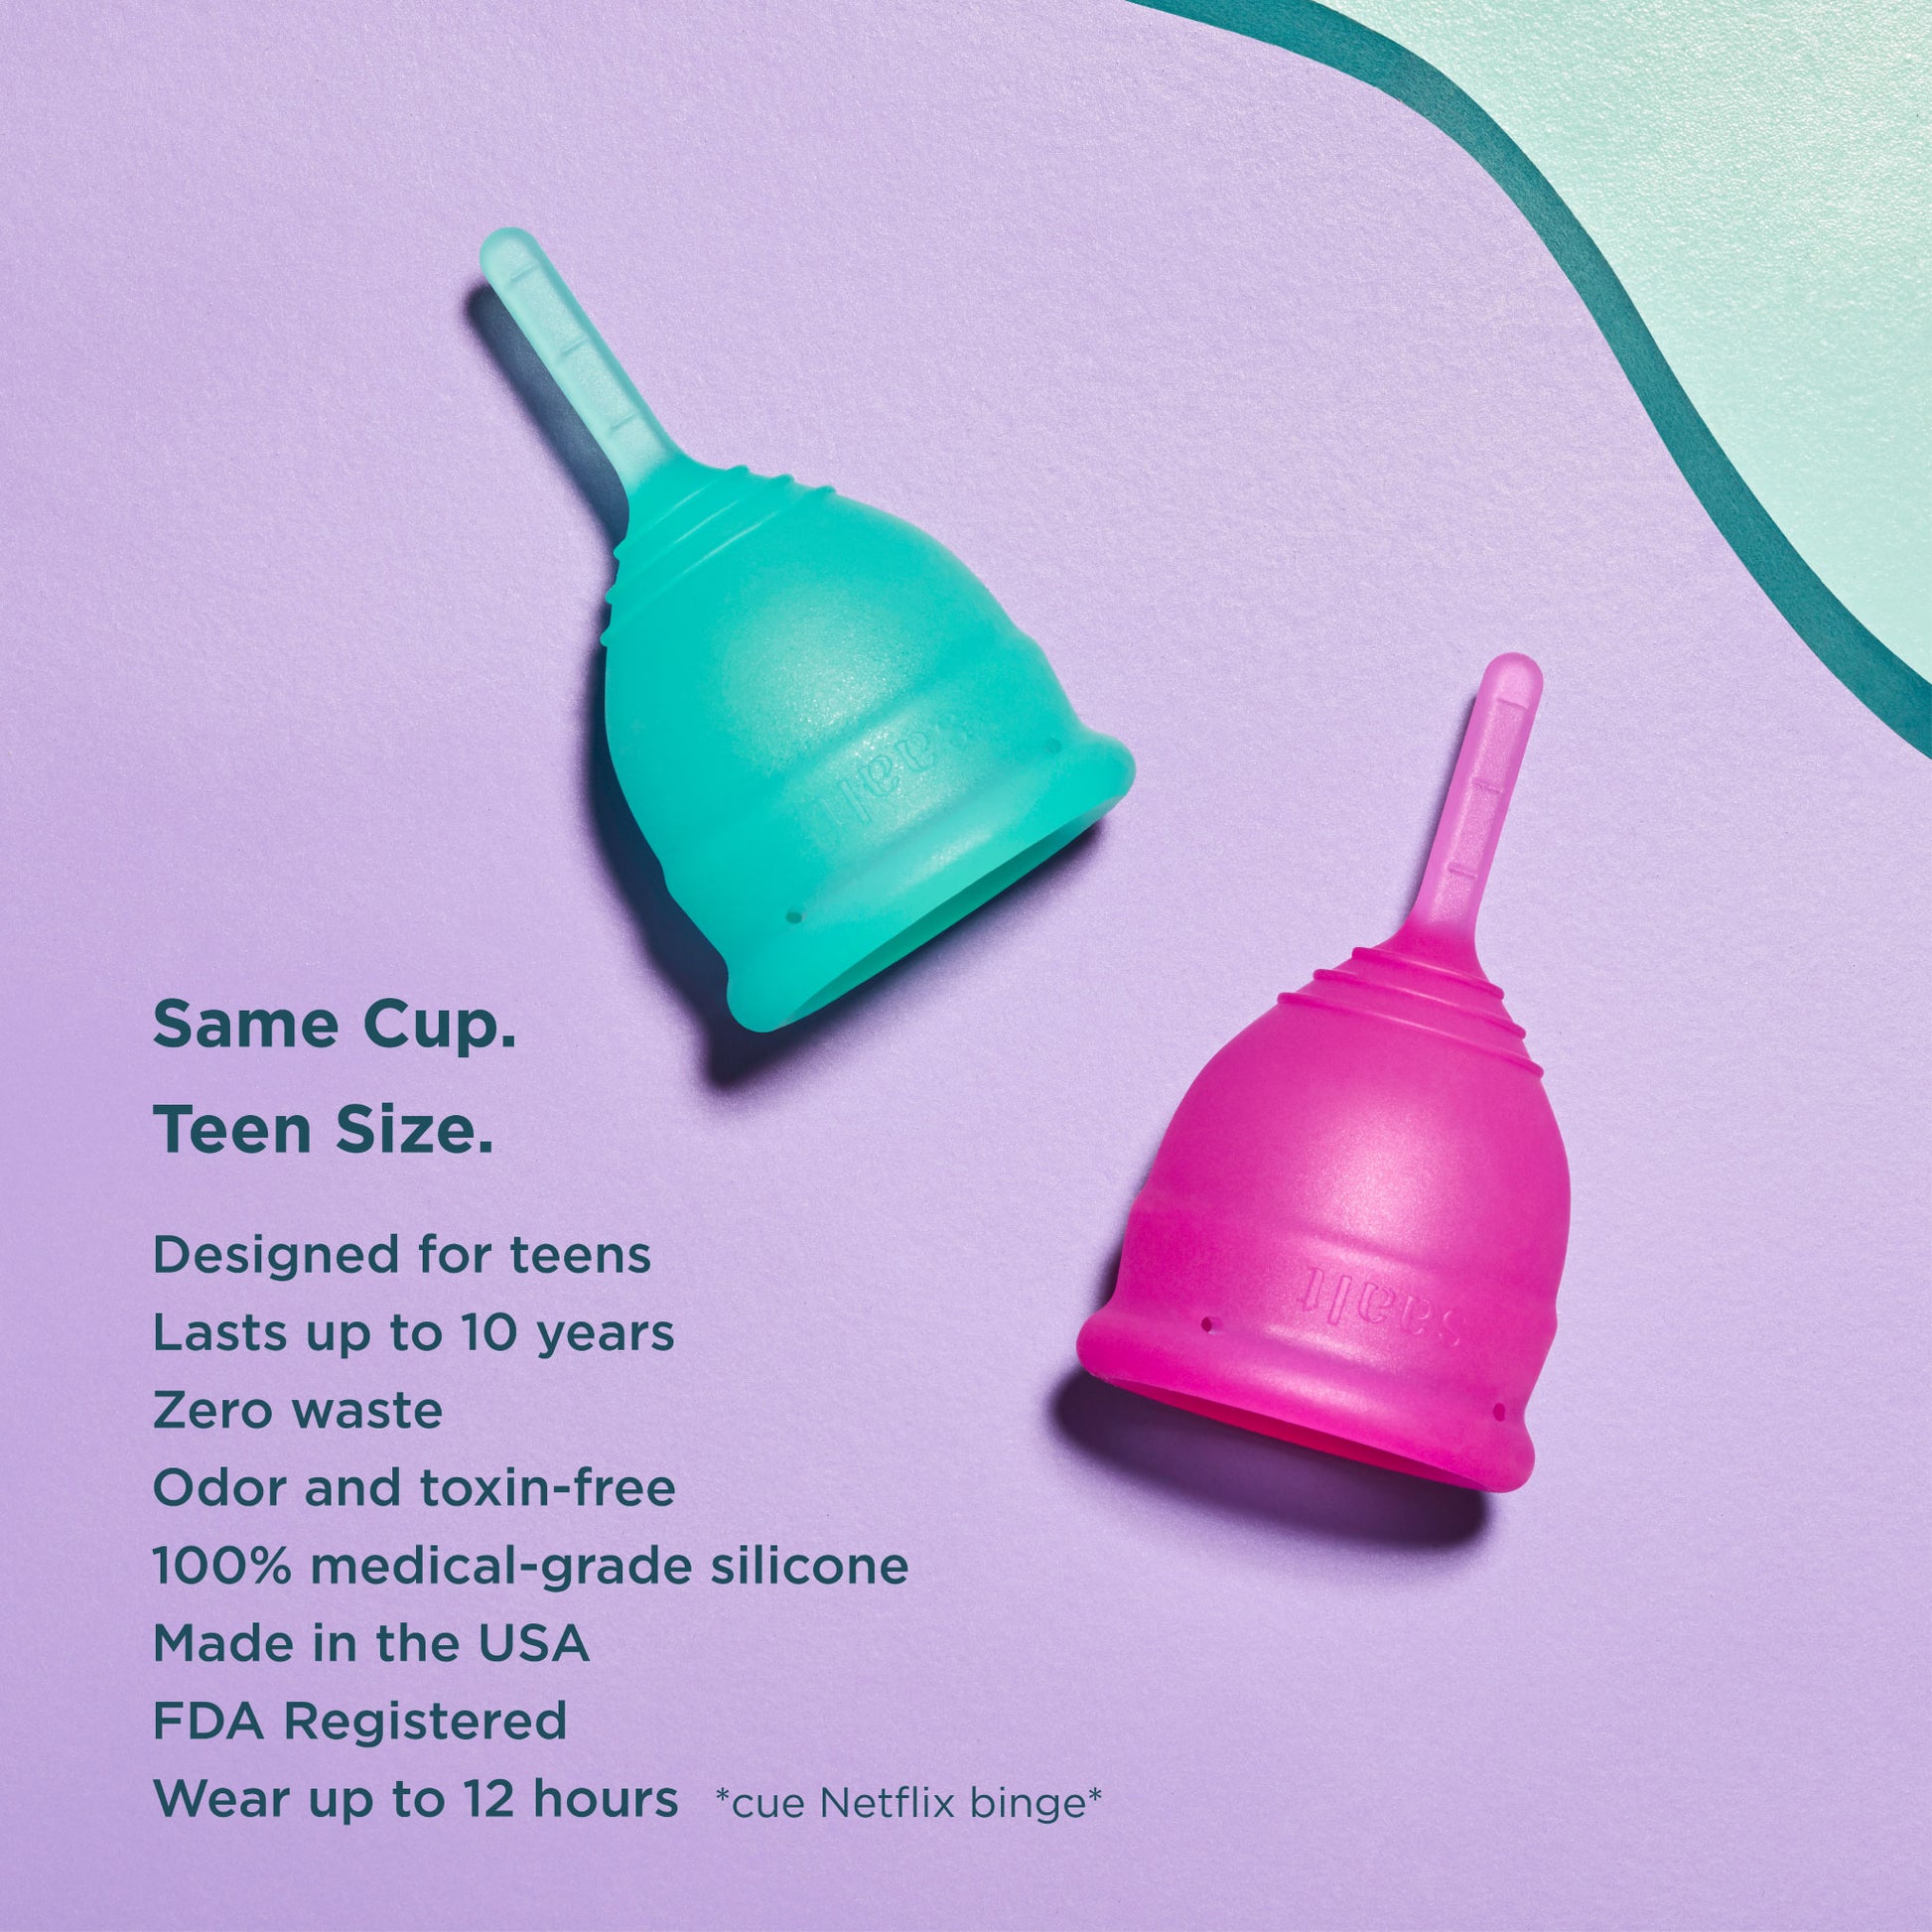 Flex Cup Starter Kit | Reusable Menstrual Cup + 2 Free Menstrual Discs |  Pull-Tab for Easy Removal | Tampon + Pad Alternative | Capacity of 3 Super